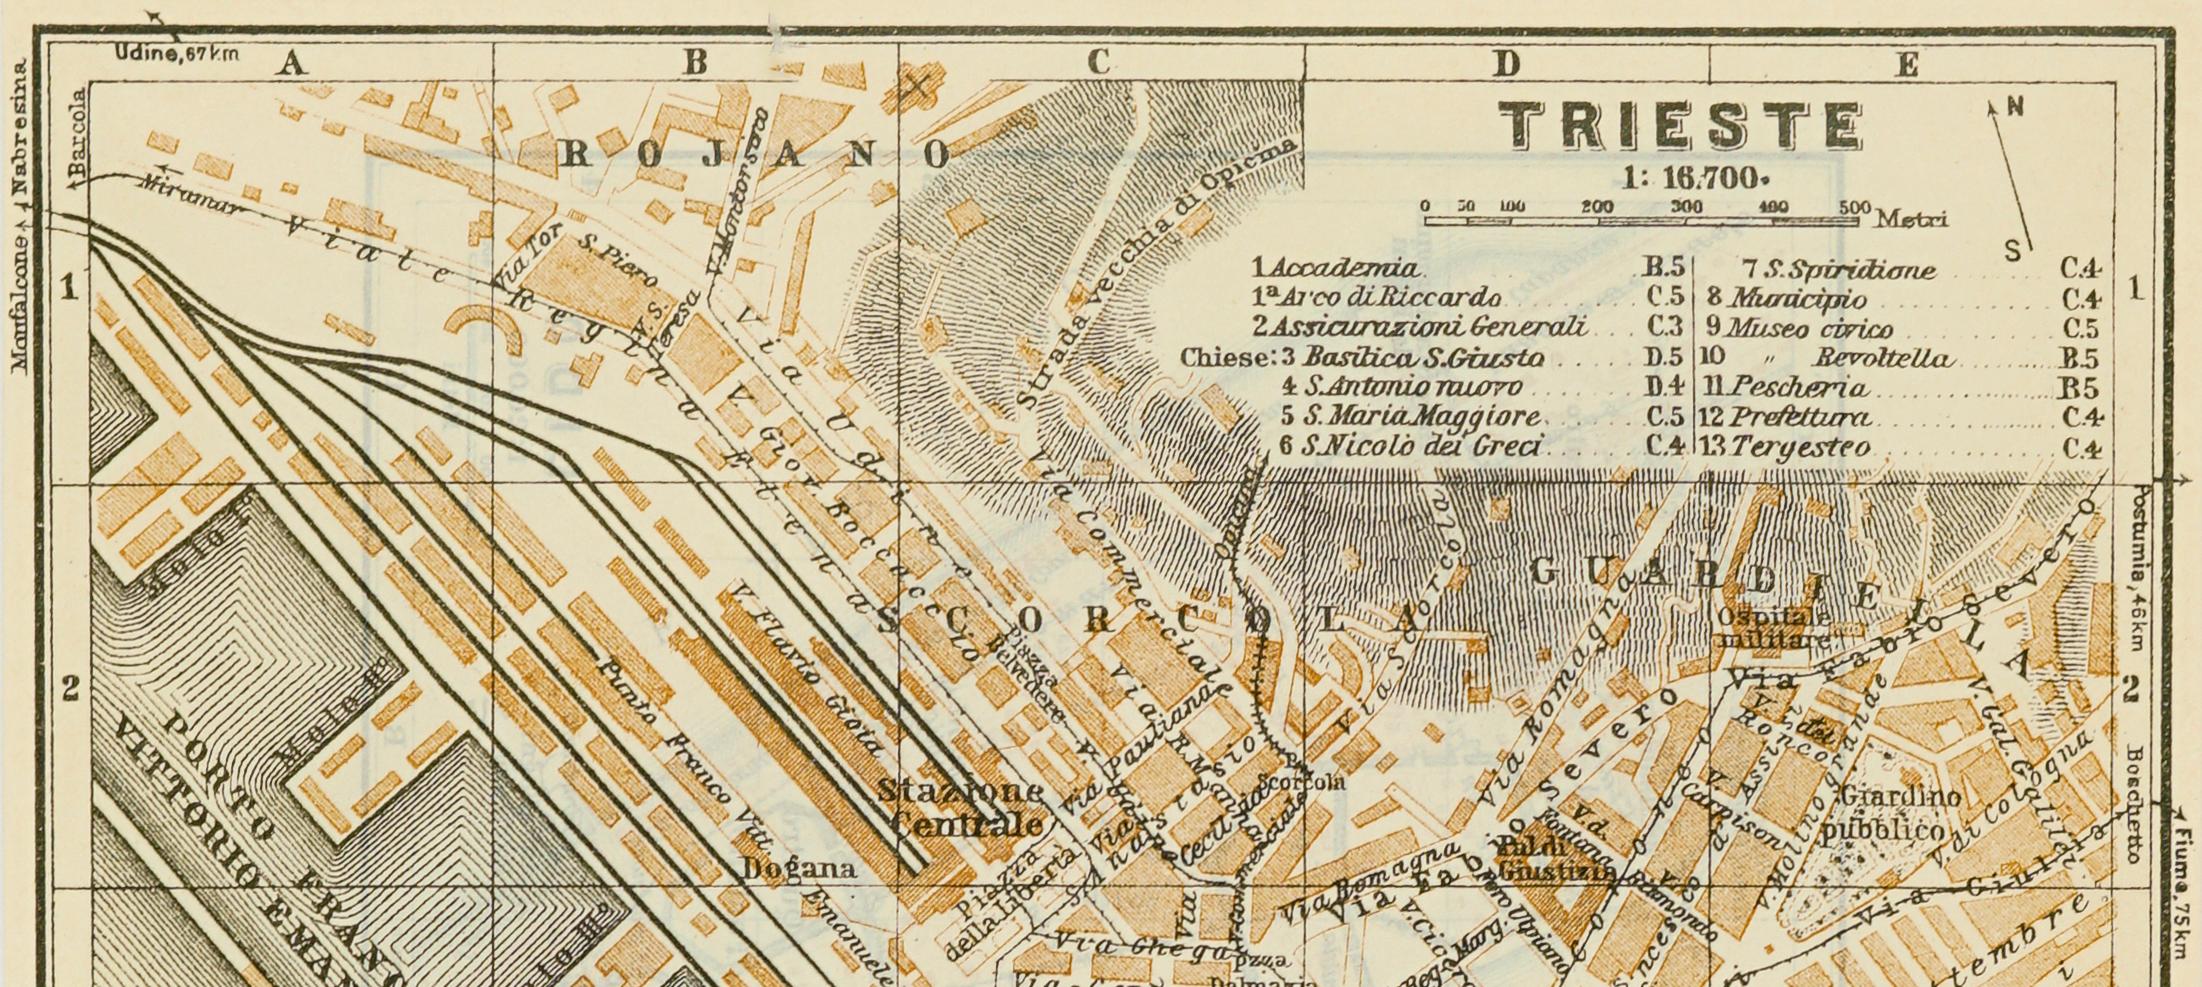 trieste italy map